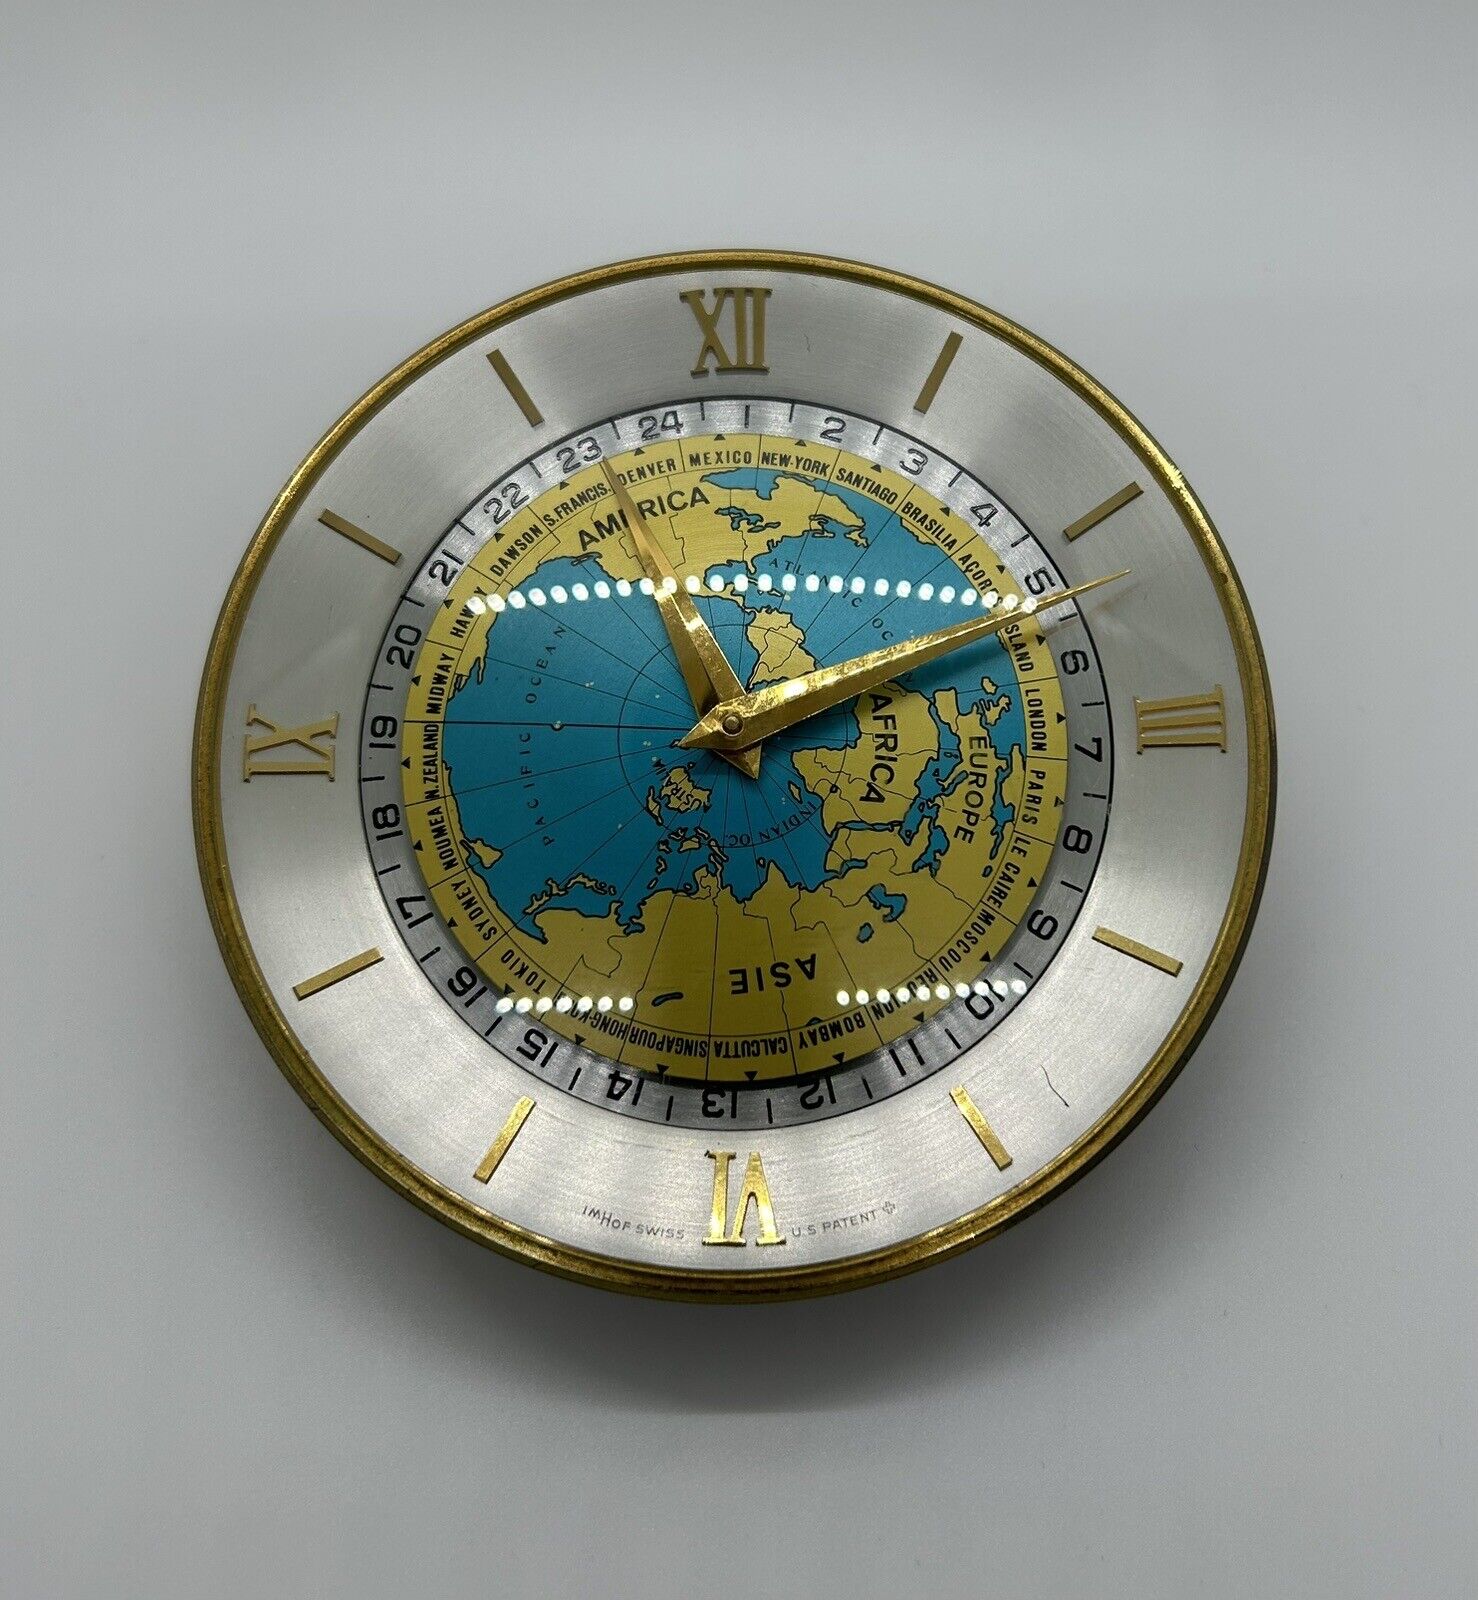 IMHOF ‘Heure Universelle’ World Time Clock